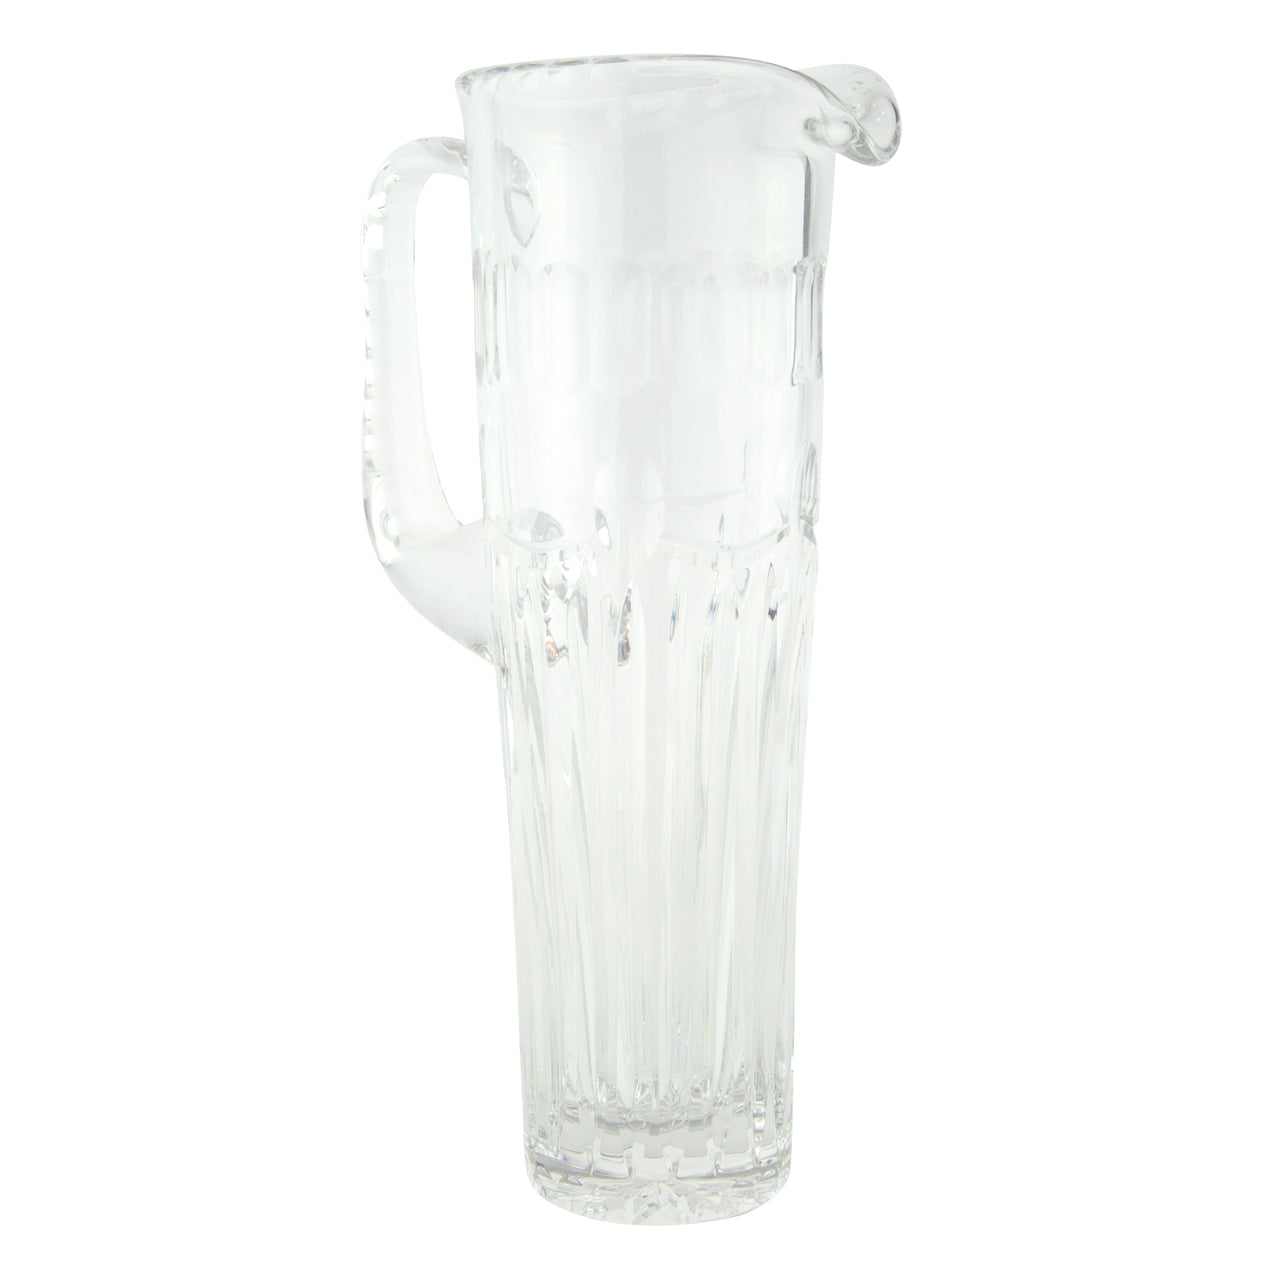 Vintage Empire Style Cut Crystal Cocktail Pitcher | The Hour 